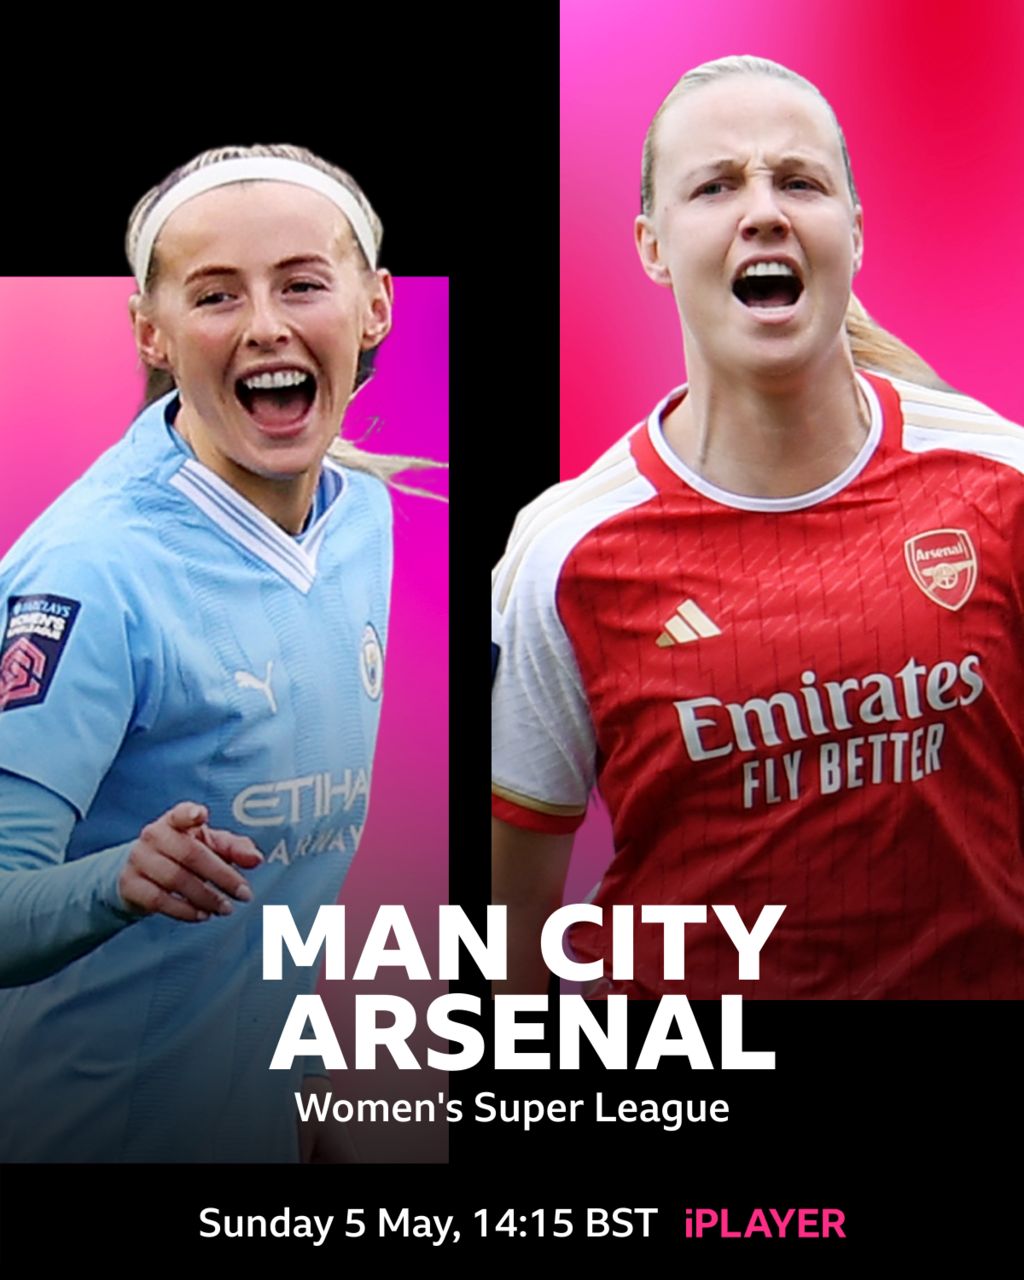 Coverage of Man City v Arsenal will be available on BBC One and BBC iPlayer from 13:50 BST on Sunday